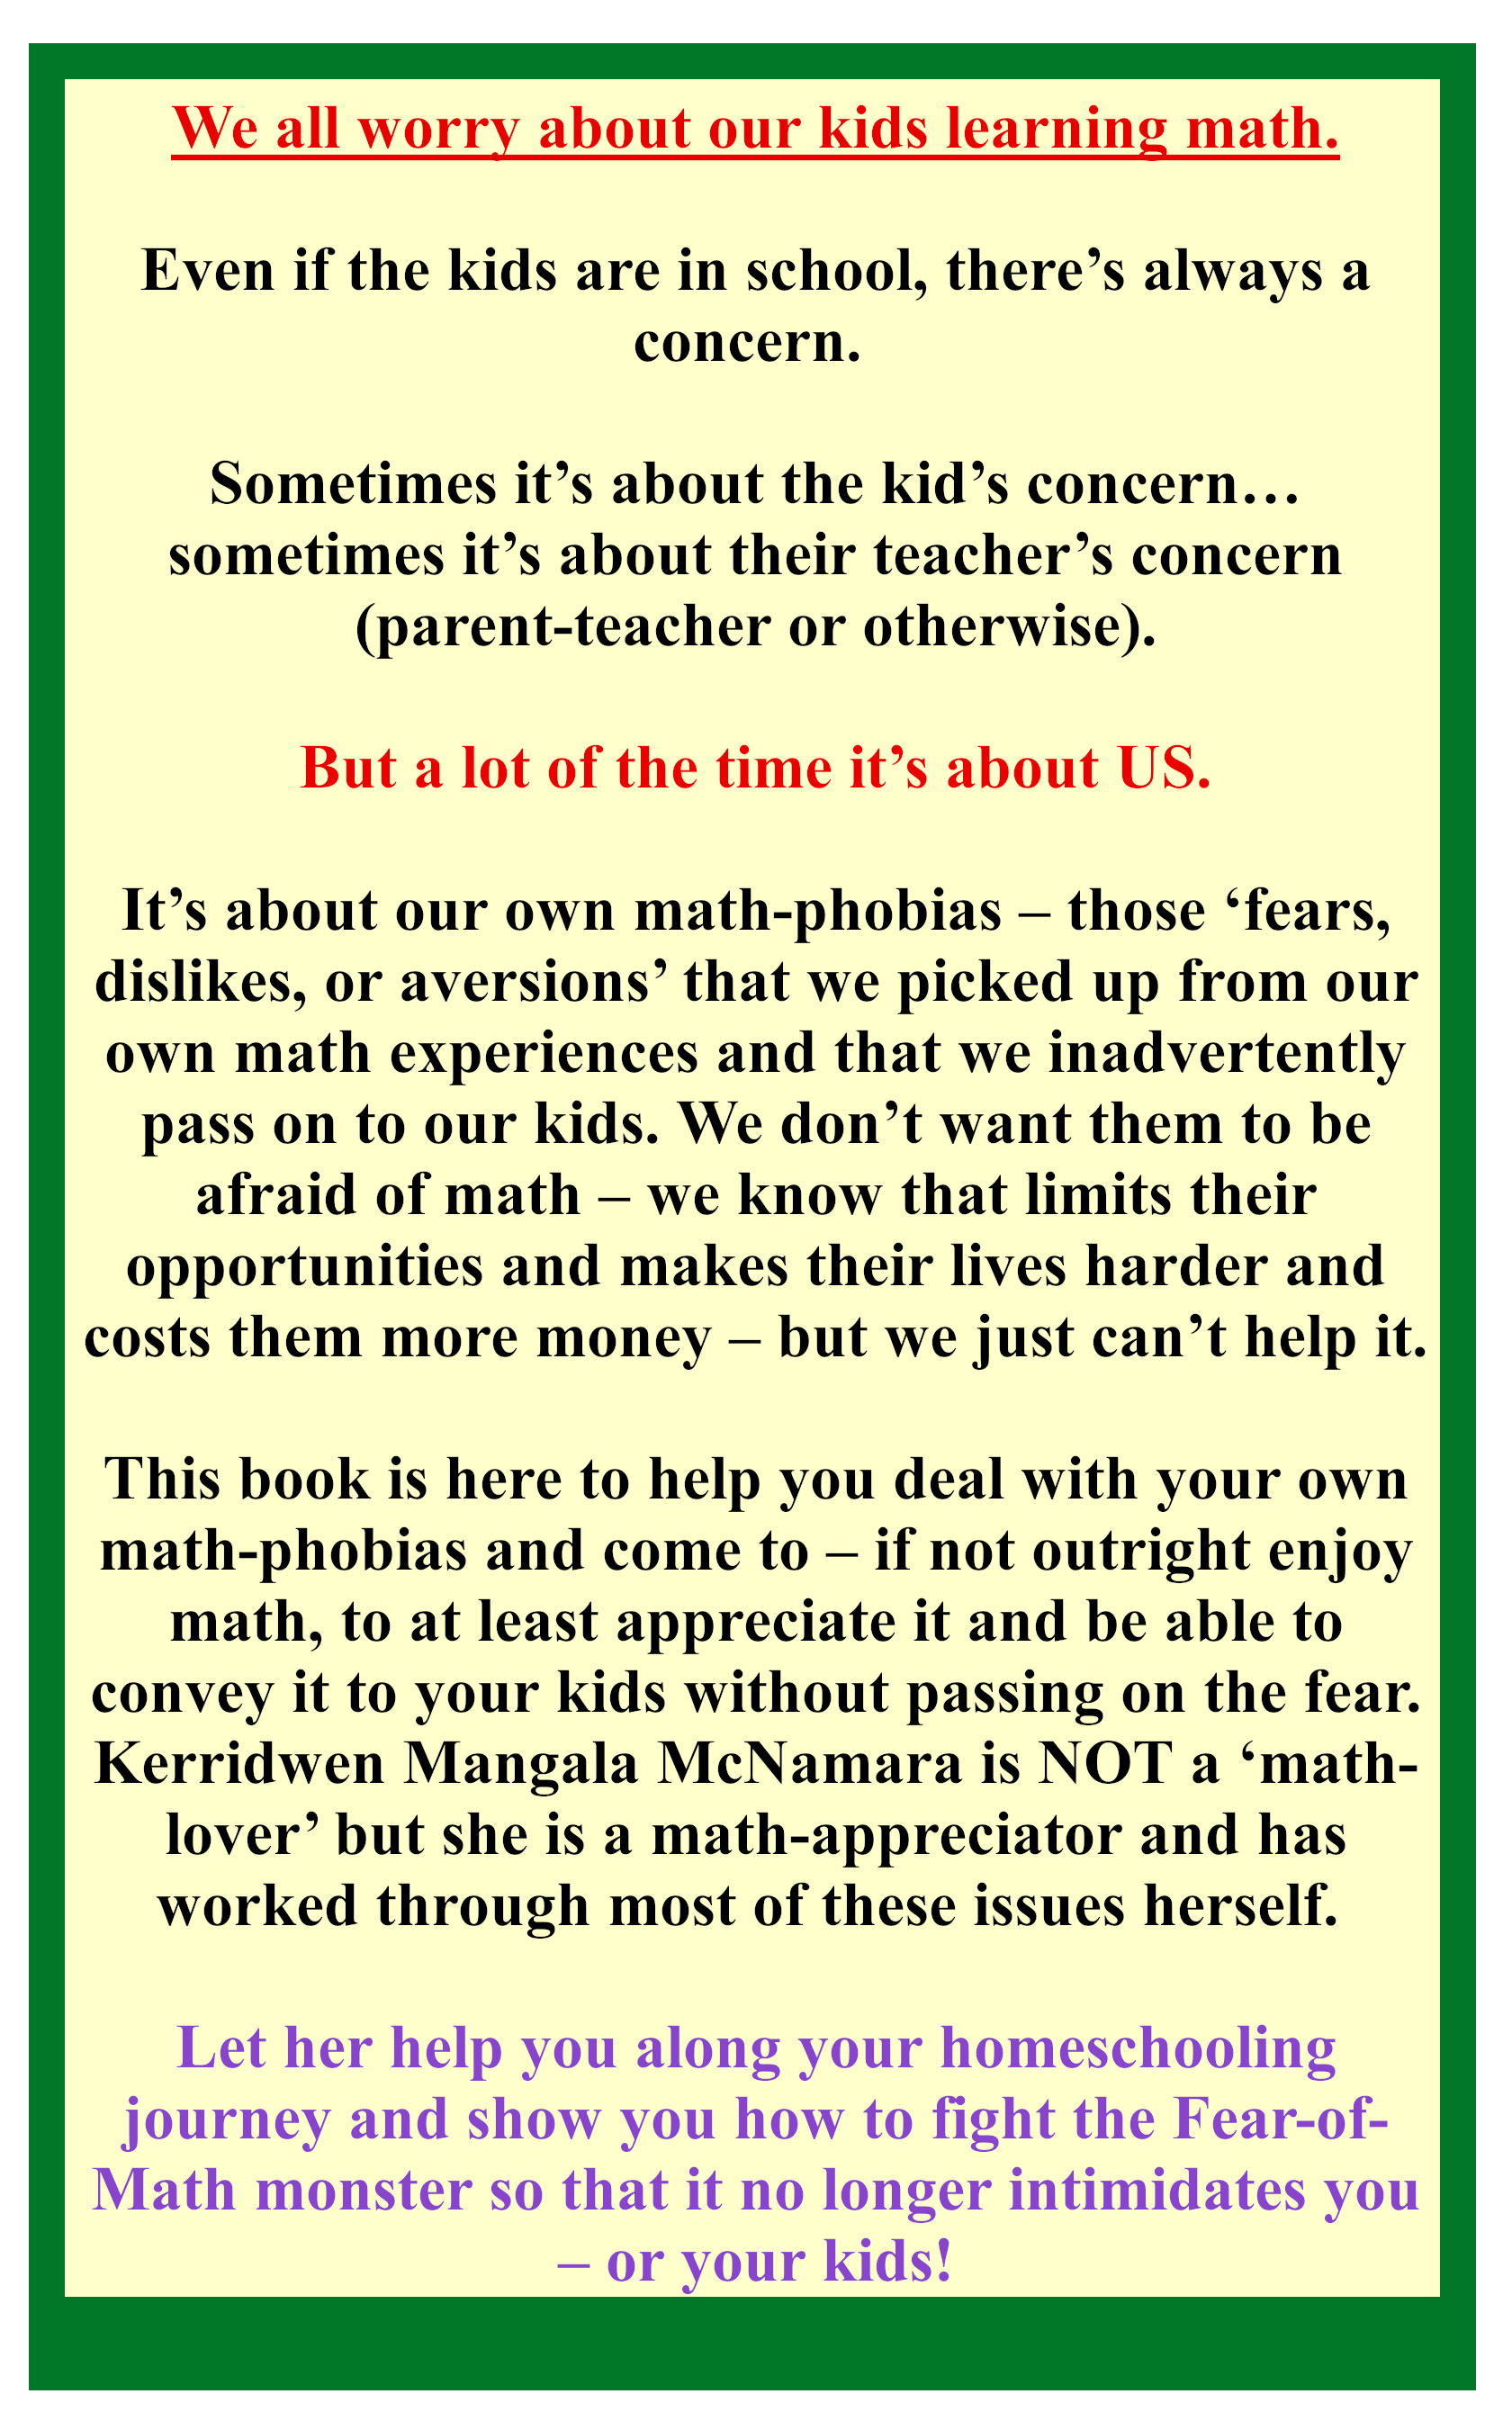 Back Blurb for book: The Homeschooling Parent Teaches MATH! Bringing Math to the Math-Averse (Parents and Kids Both!)